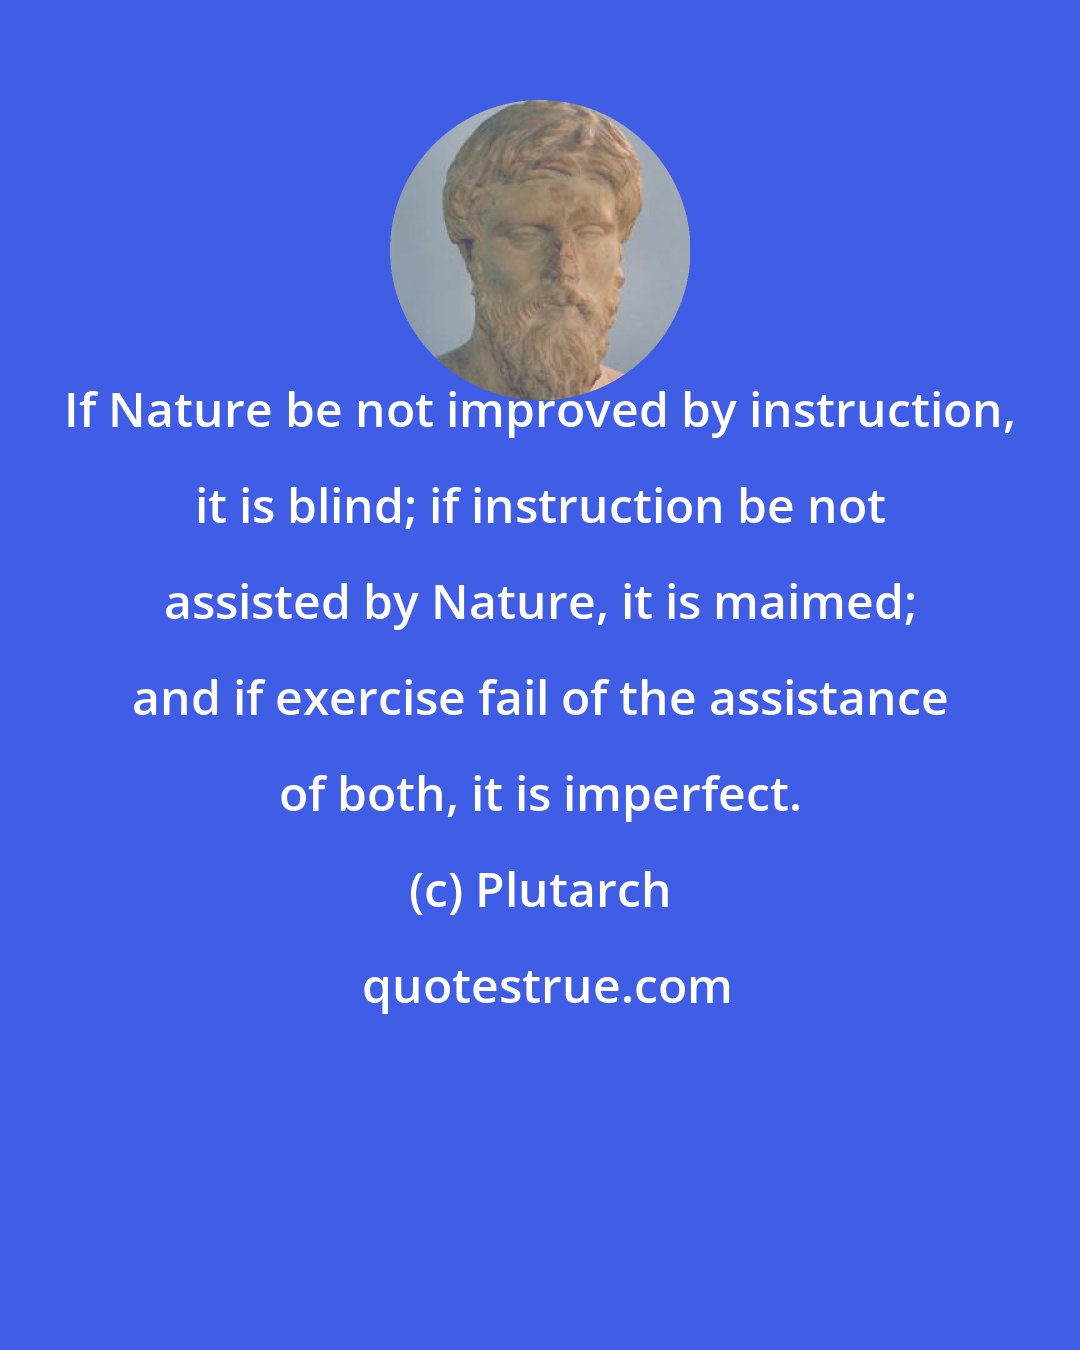 Plutarch: If Nature be not improved by instruction, it is blind; if instruction be not assisted by Nature, it is maimed; and if exercise fail of the assistance of both, it is imperfect.